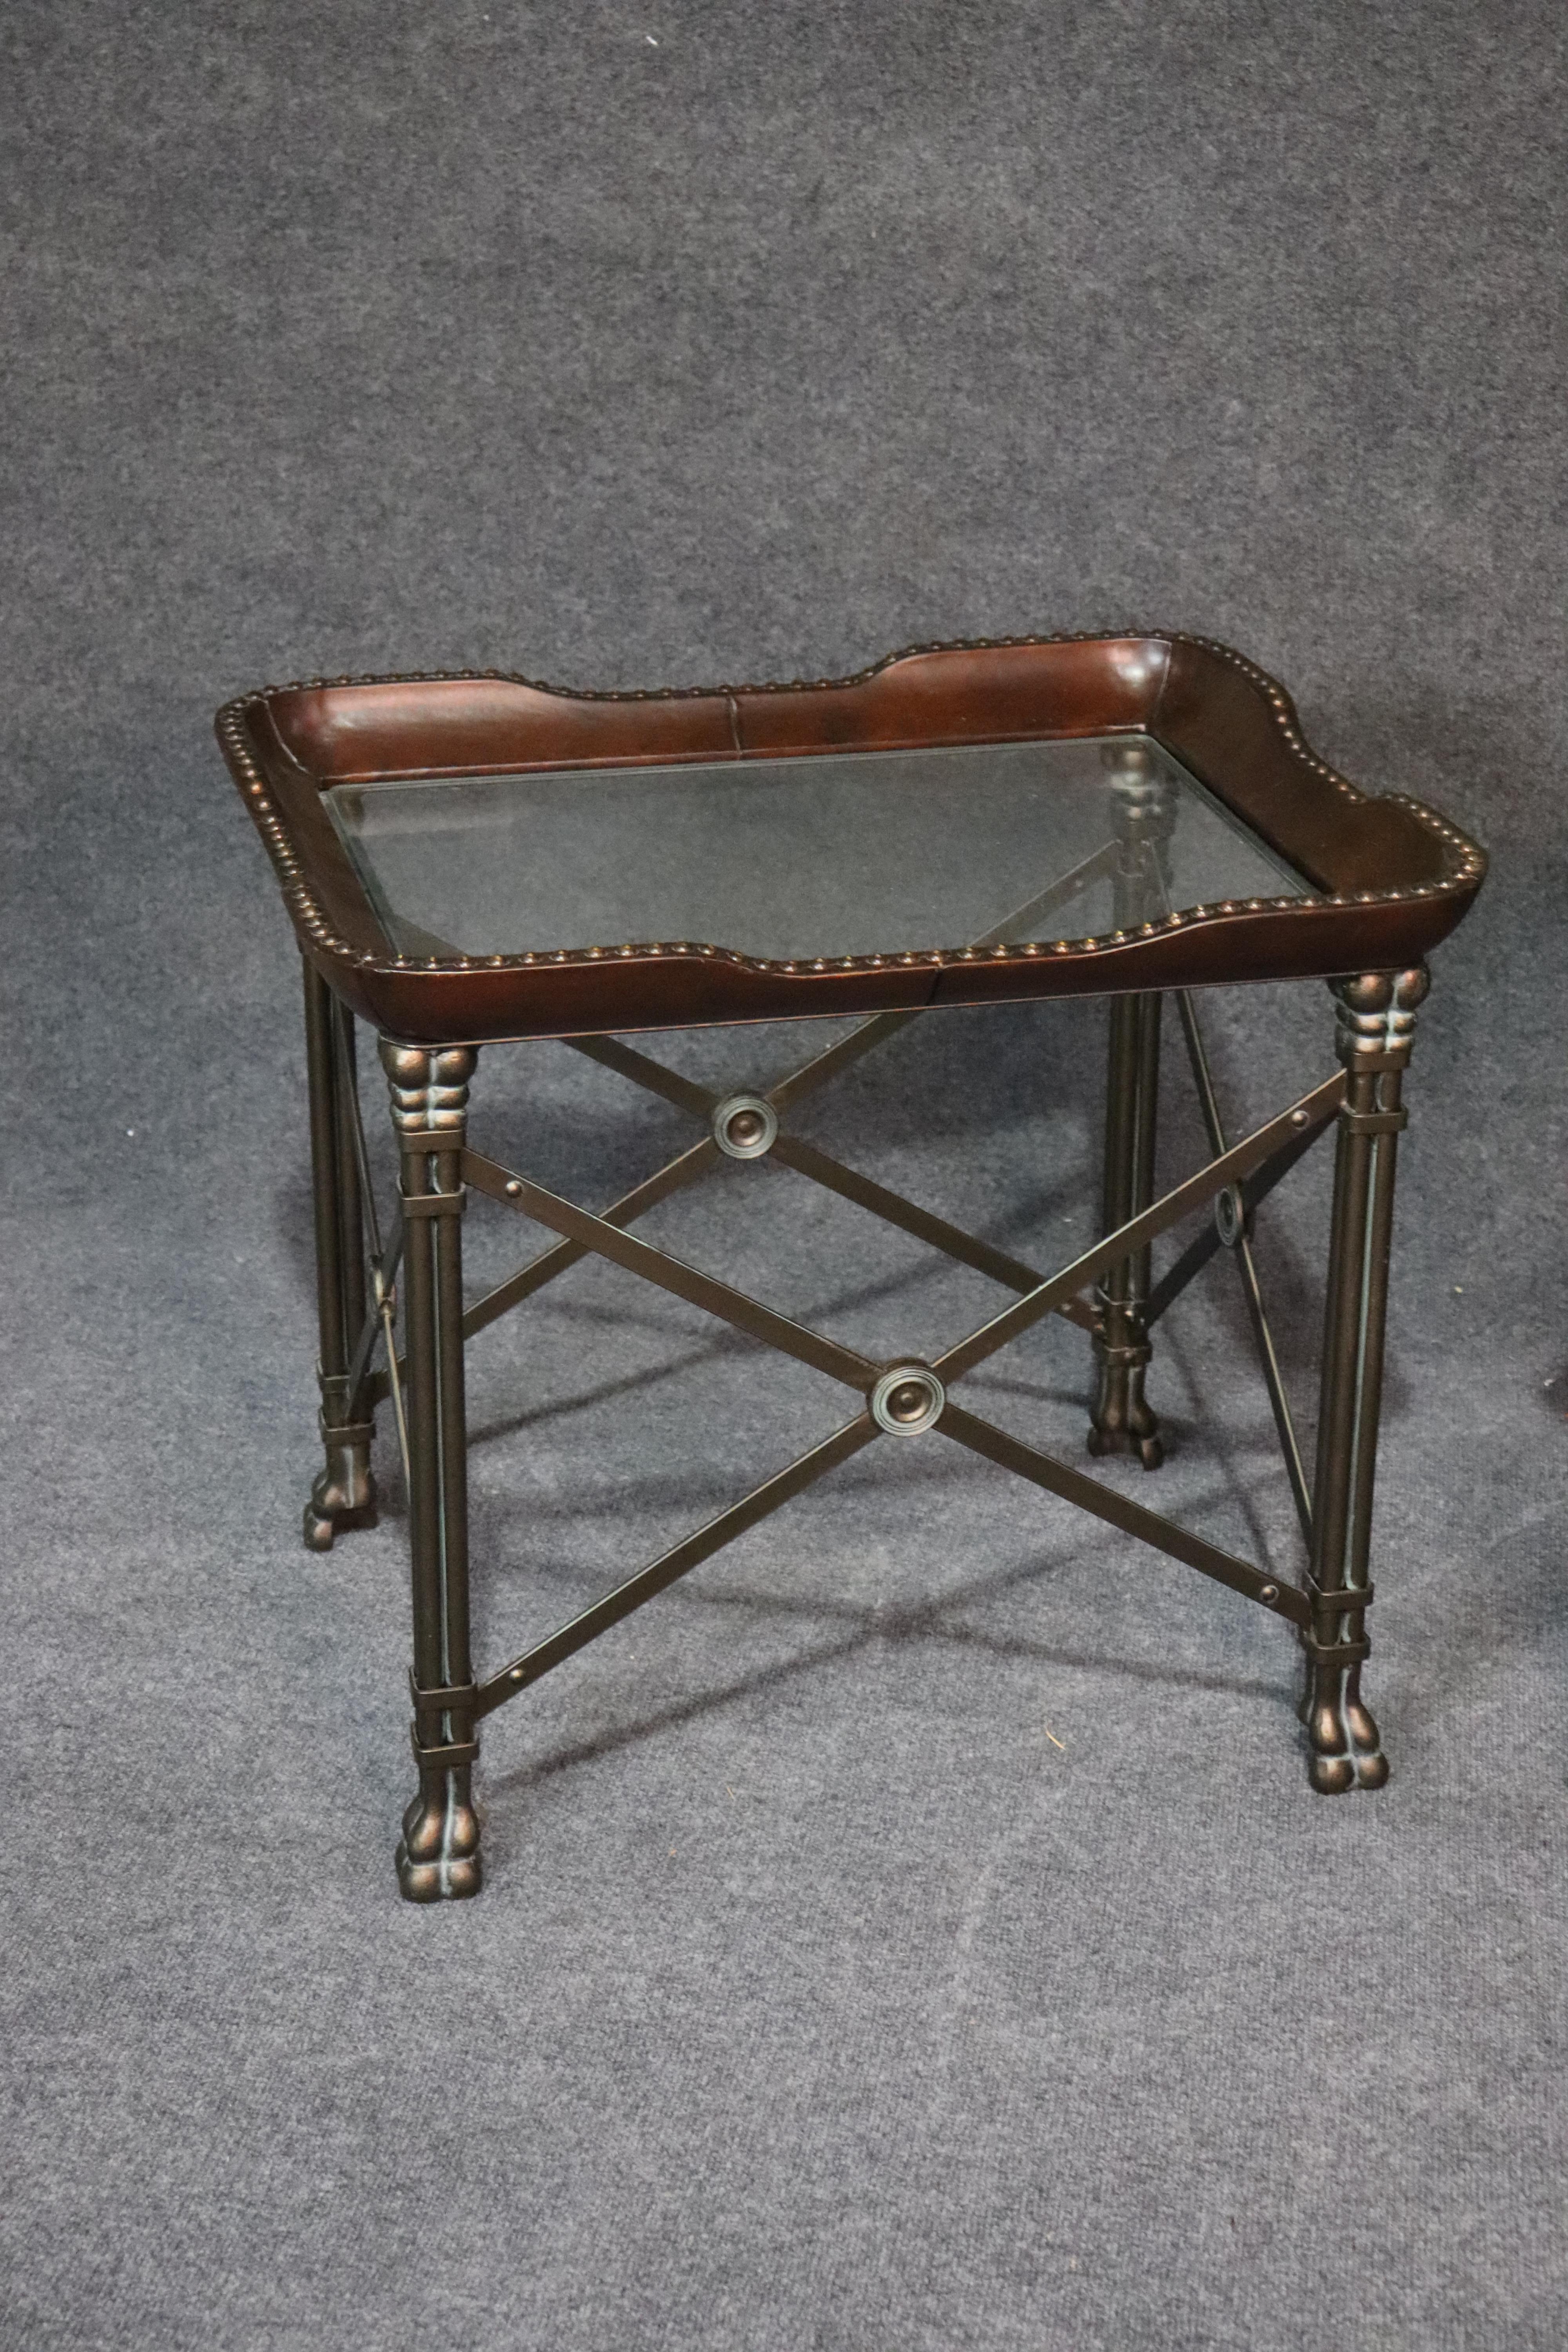 This is a superb pair of Maitland Smith style steel, leather bound and glass x form Directoire tables. They are very substantial and of the finest quality. They are unmarked but appear to be Maitland Smith as they ressemble closely their leather